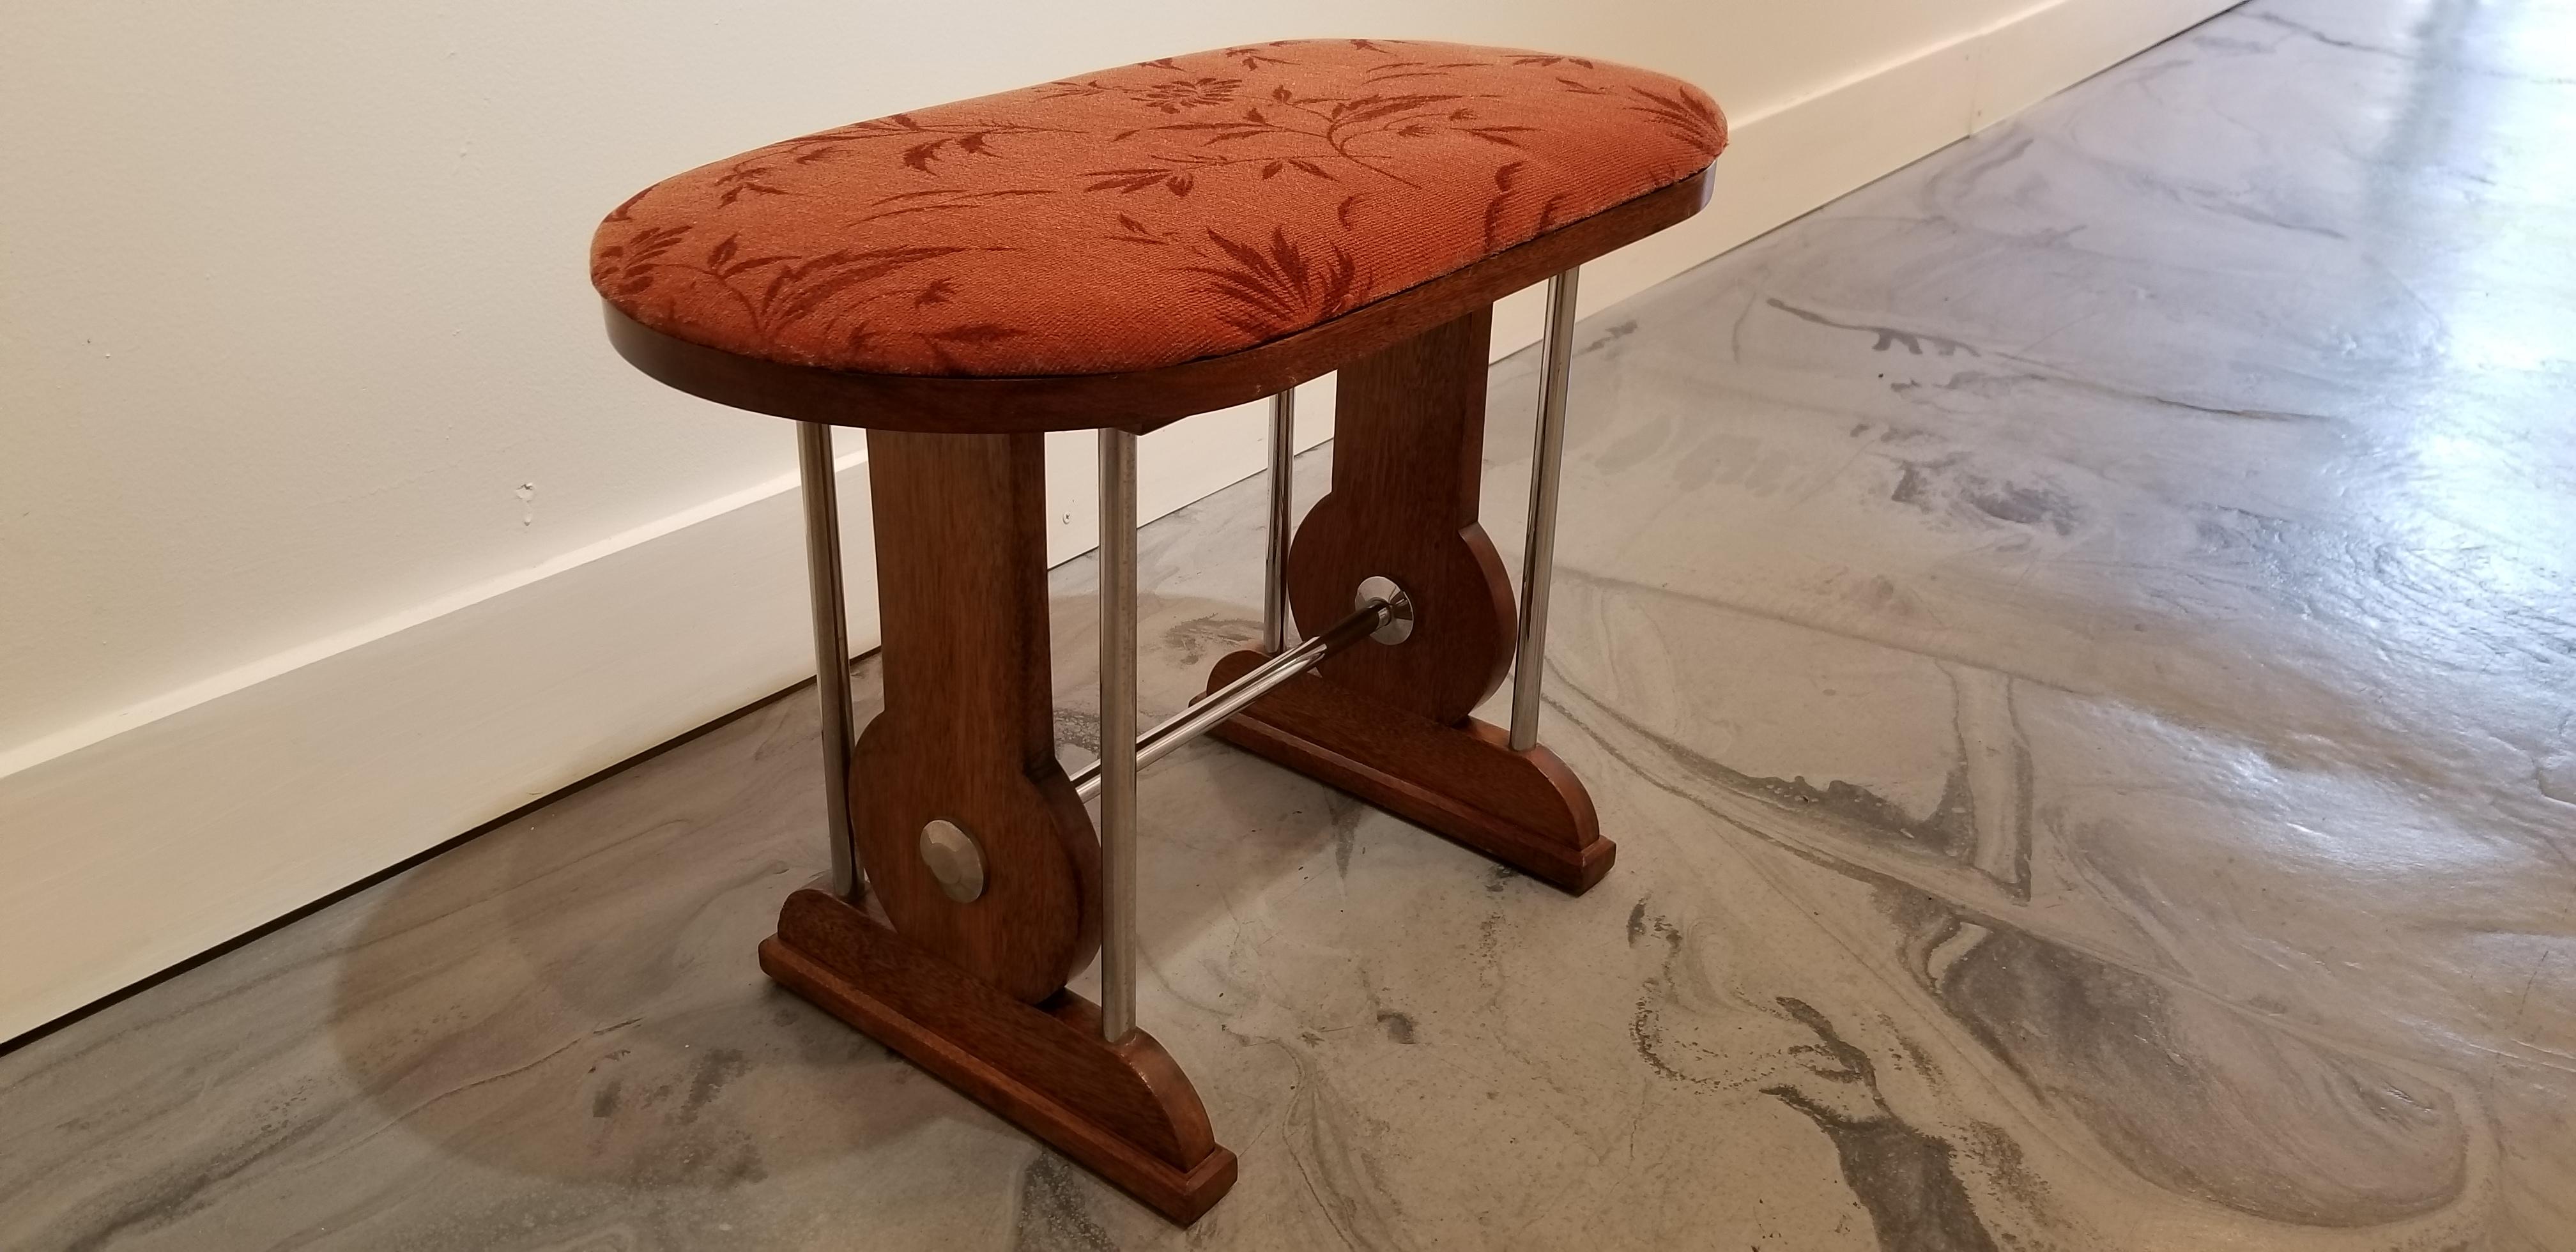 A period Art Deco stool / bench made of solid mahogany with tubular chrome-plated steel detail, Europe, circa 1920s. Excellent original condition.